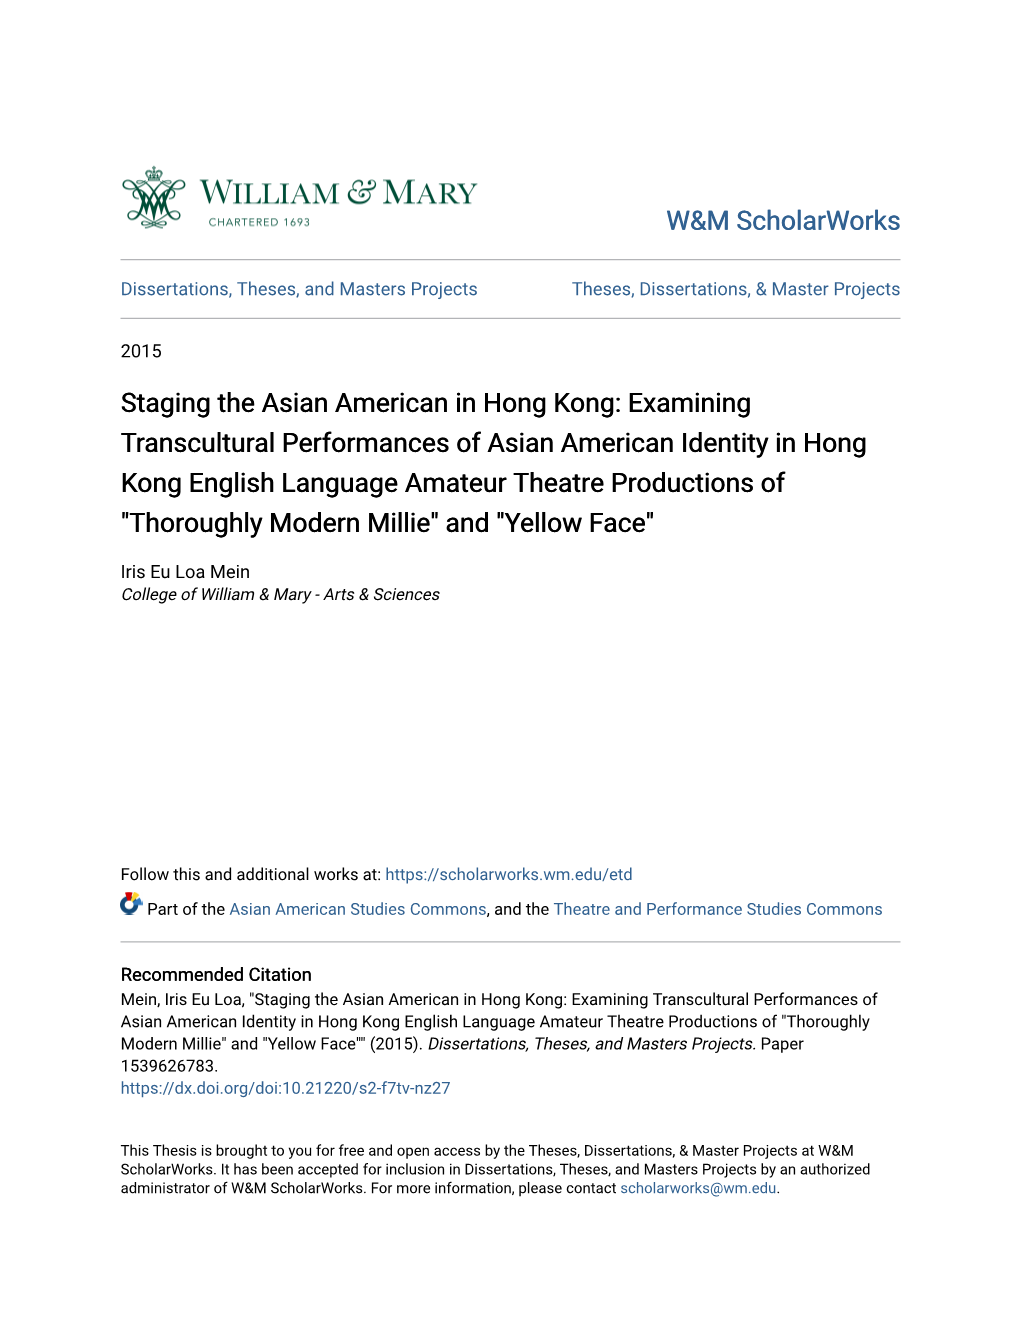 Staging the Asian American in Hong Kong: Examining Transcultural